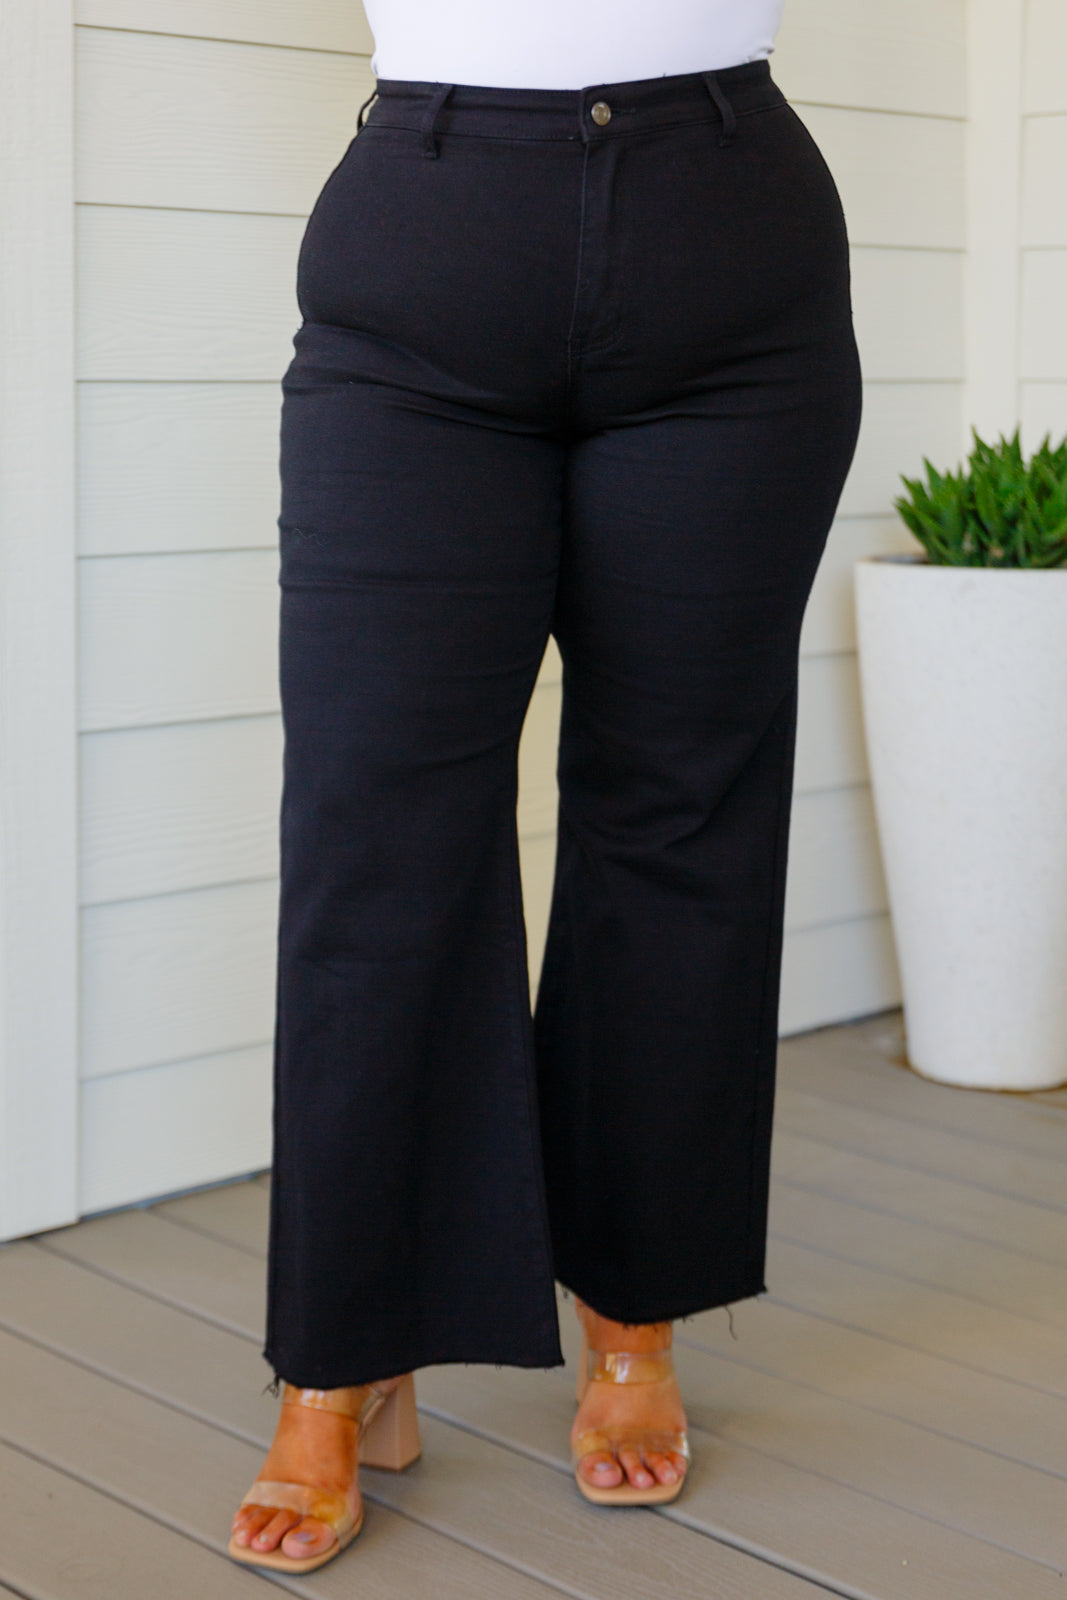 August High Rise Wide Leg Crop Jeans in Black - WEBSITE EXCLUSIVE